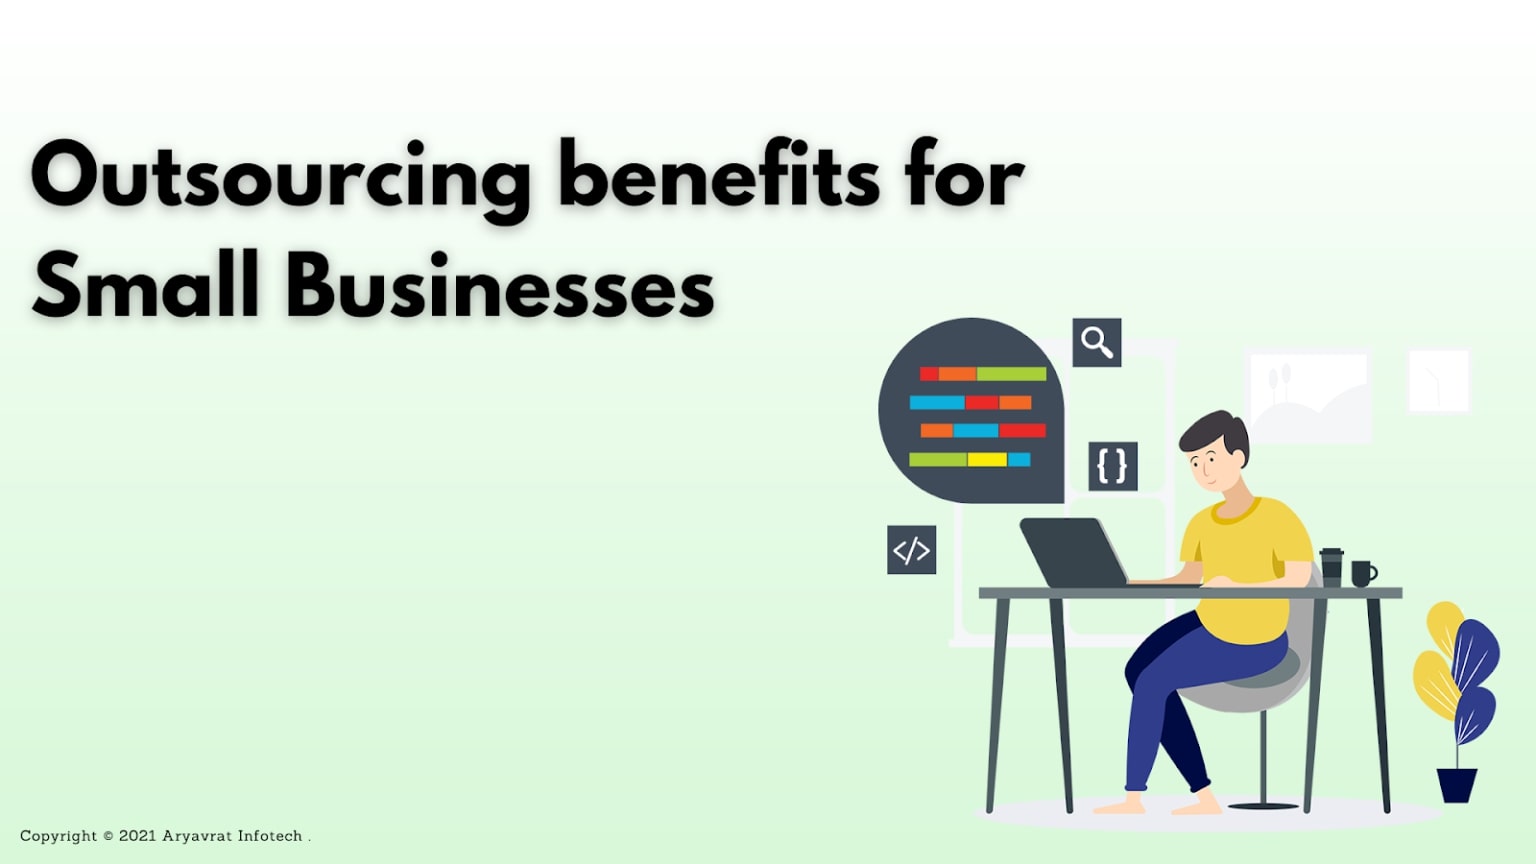 What are the steps to successful outsourcing for your small business?